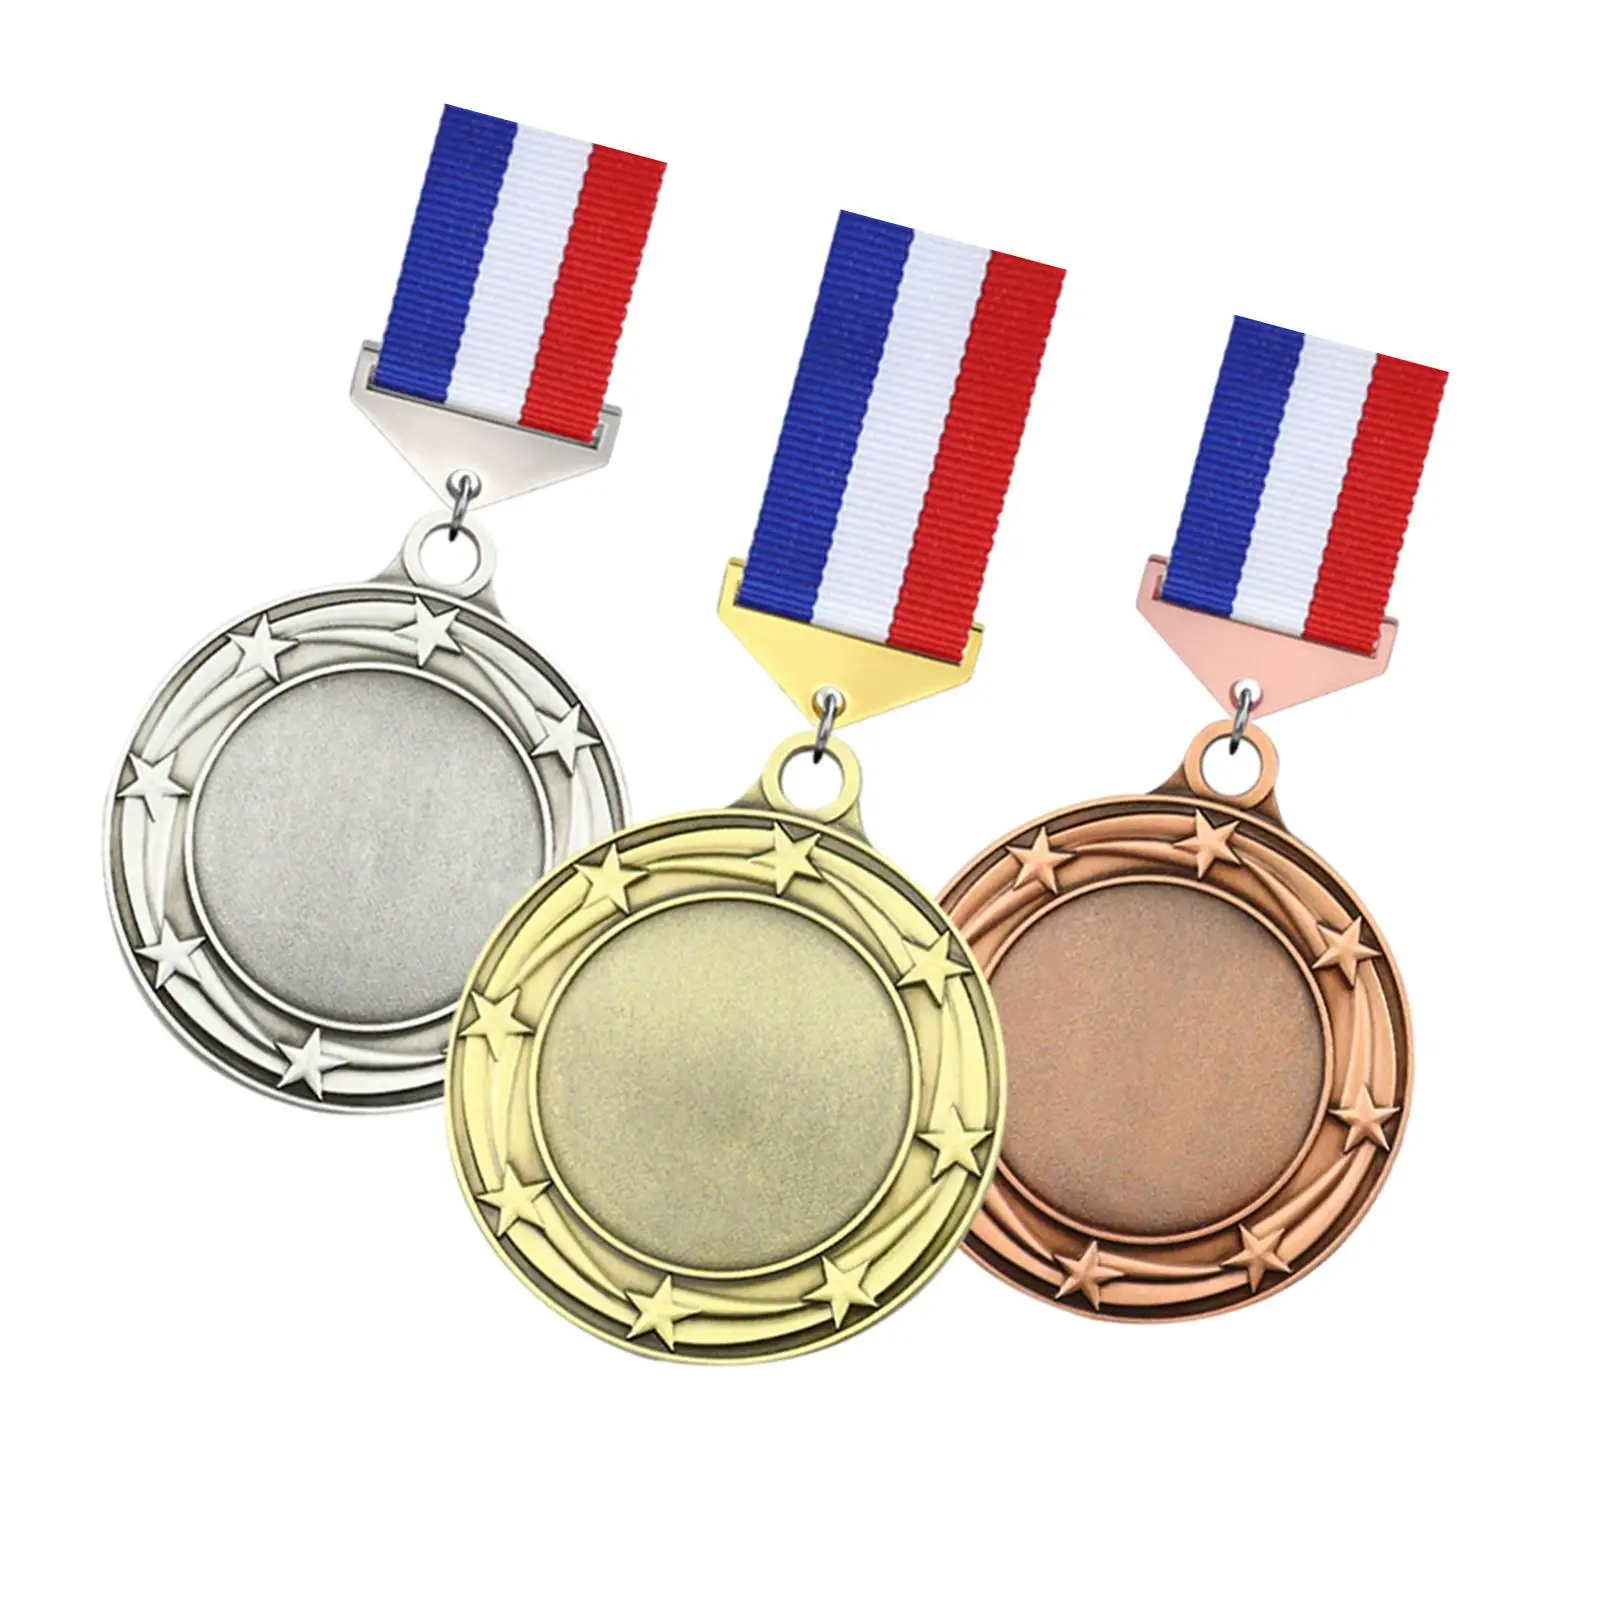 3Pcs Blank Medals Zinc Alloy Prize Gift with Ribbons Award Medals for Spelling Bees Events School Sports Baseball Softball